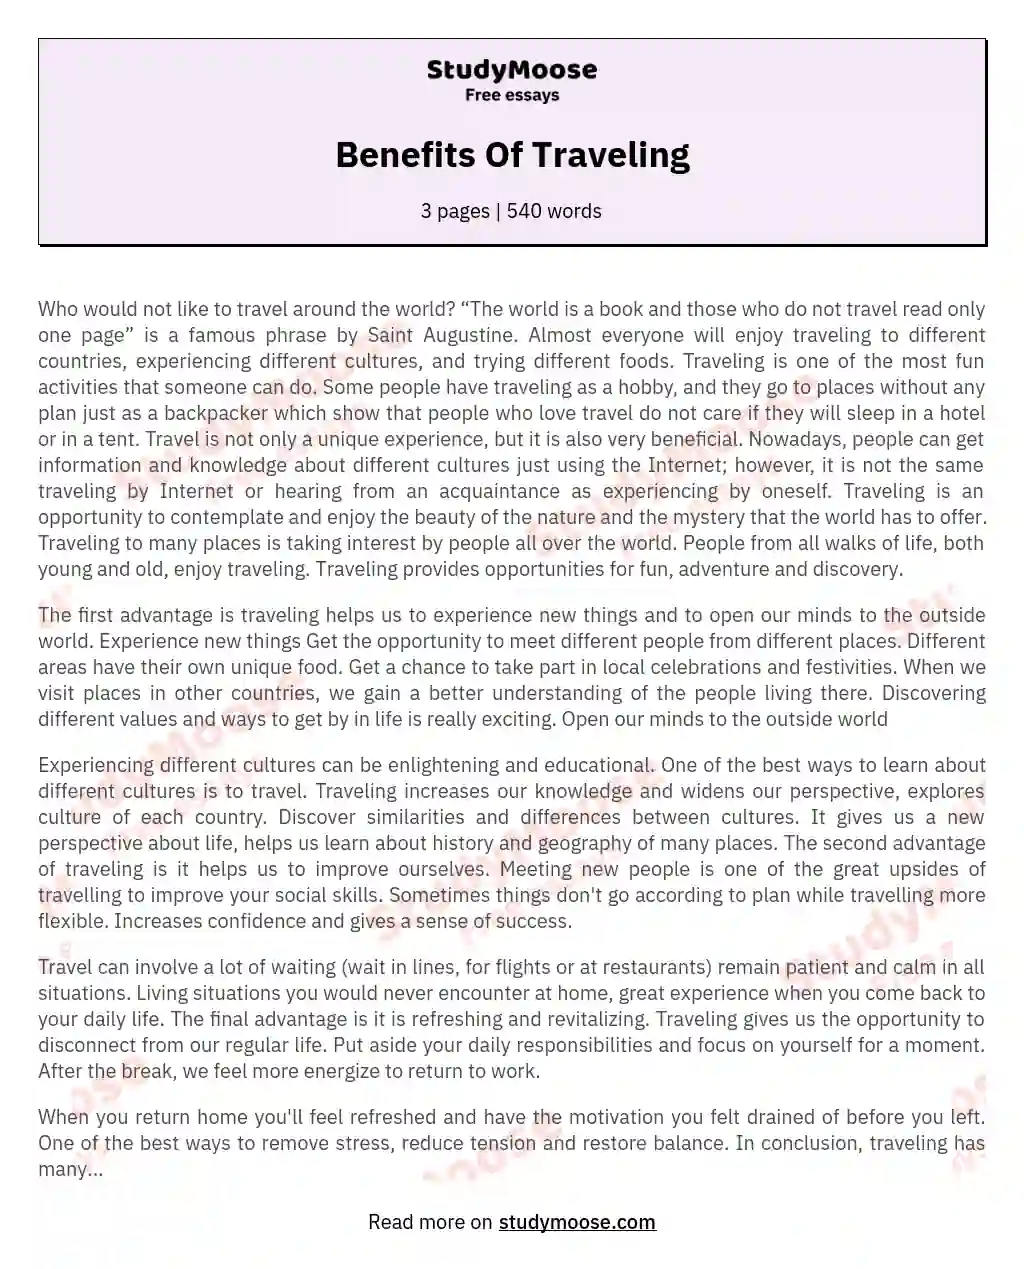 essay about benefits of traveling